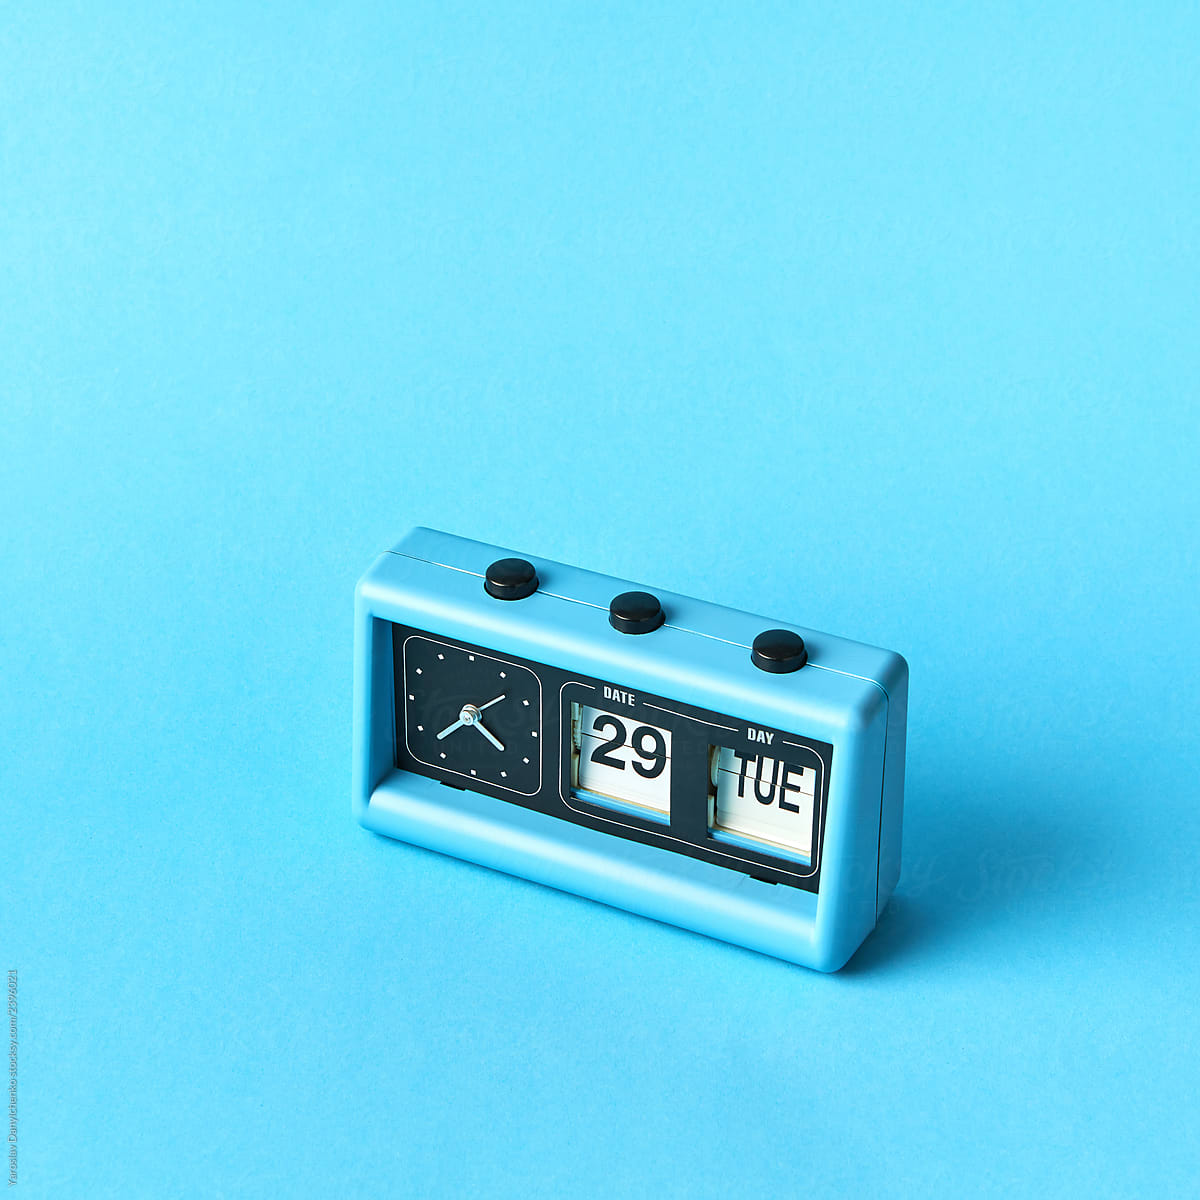 Vintage blue flip clock with calendar on a blue background with copy space. Day TUE, date 29, time is twenty two to five.